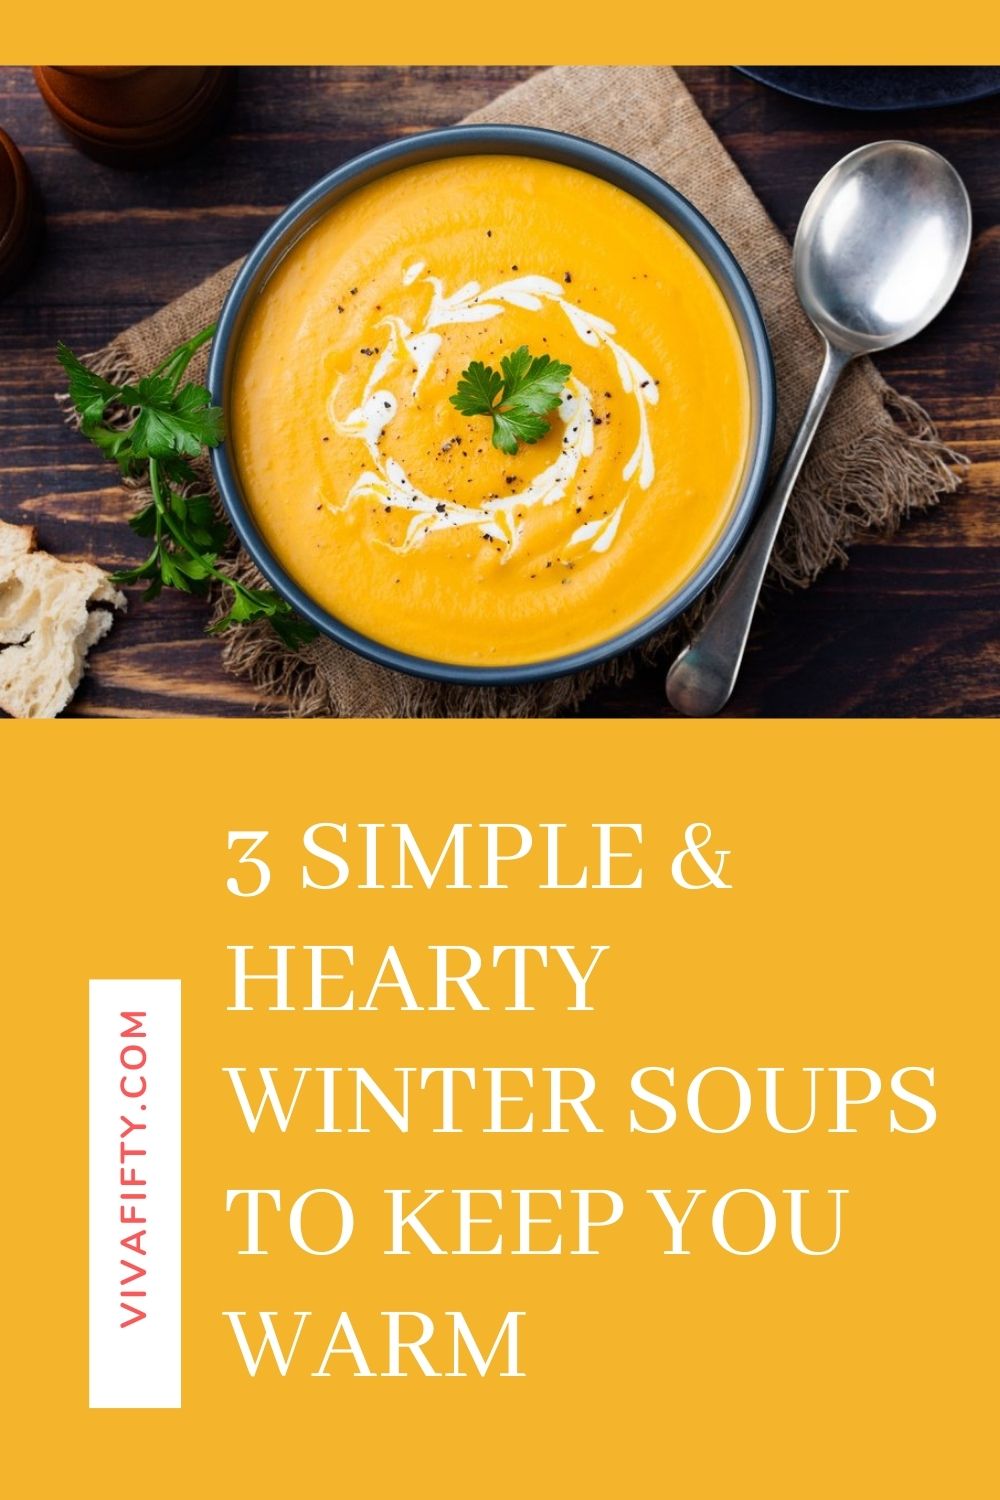 3 simple winter soups that you can cook in only a few minutes will keep you warm and healthy.